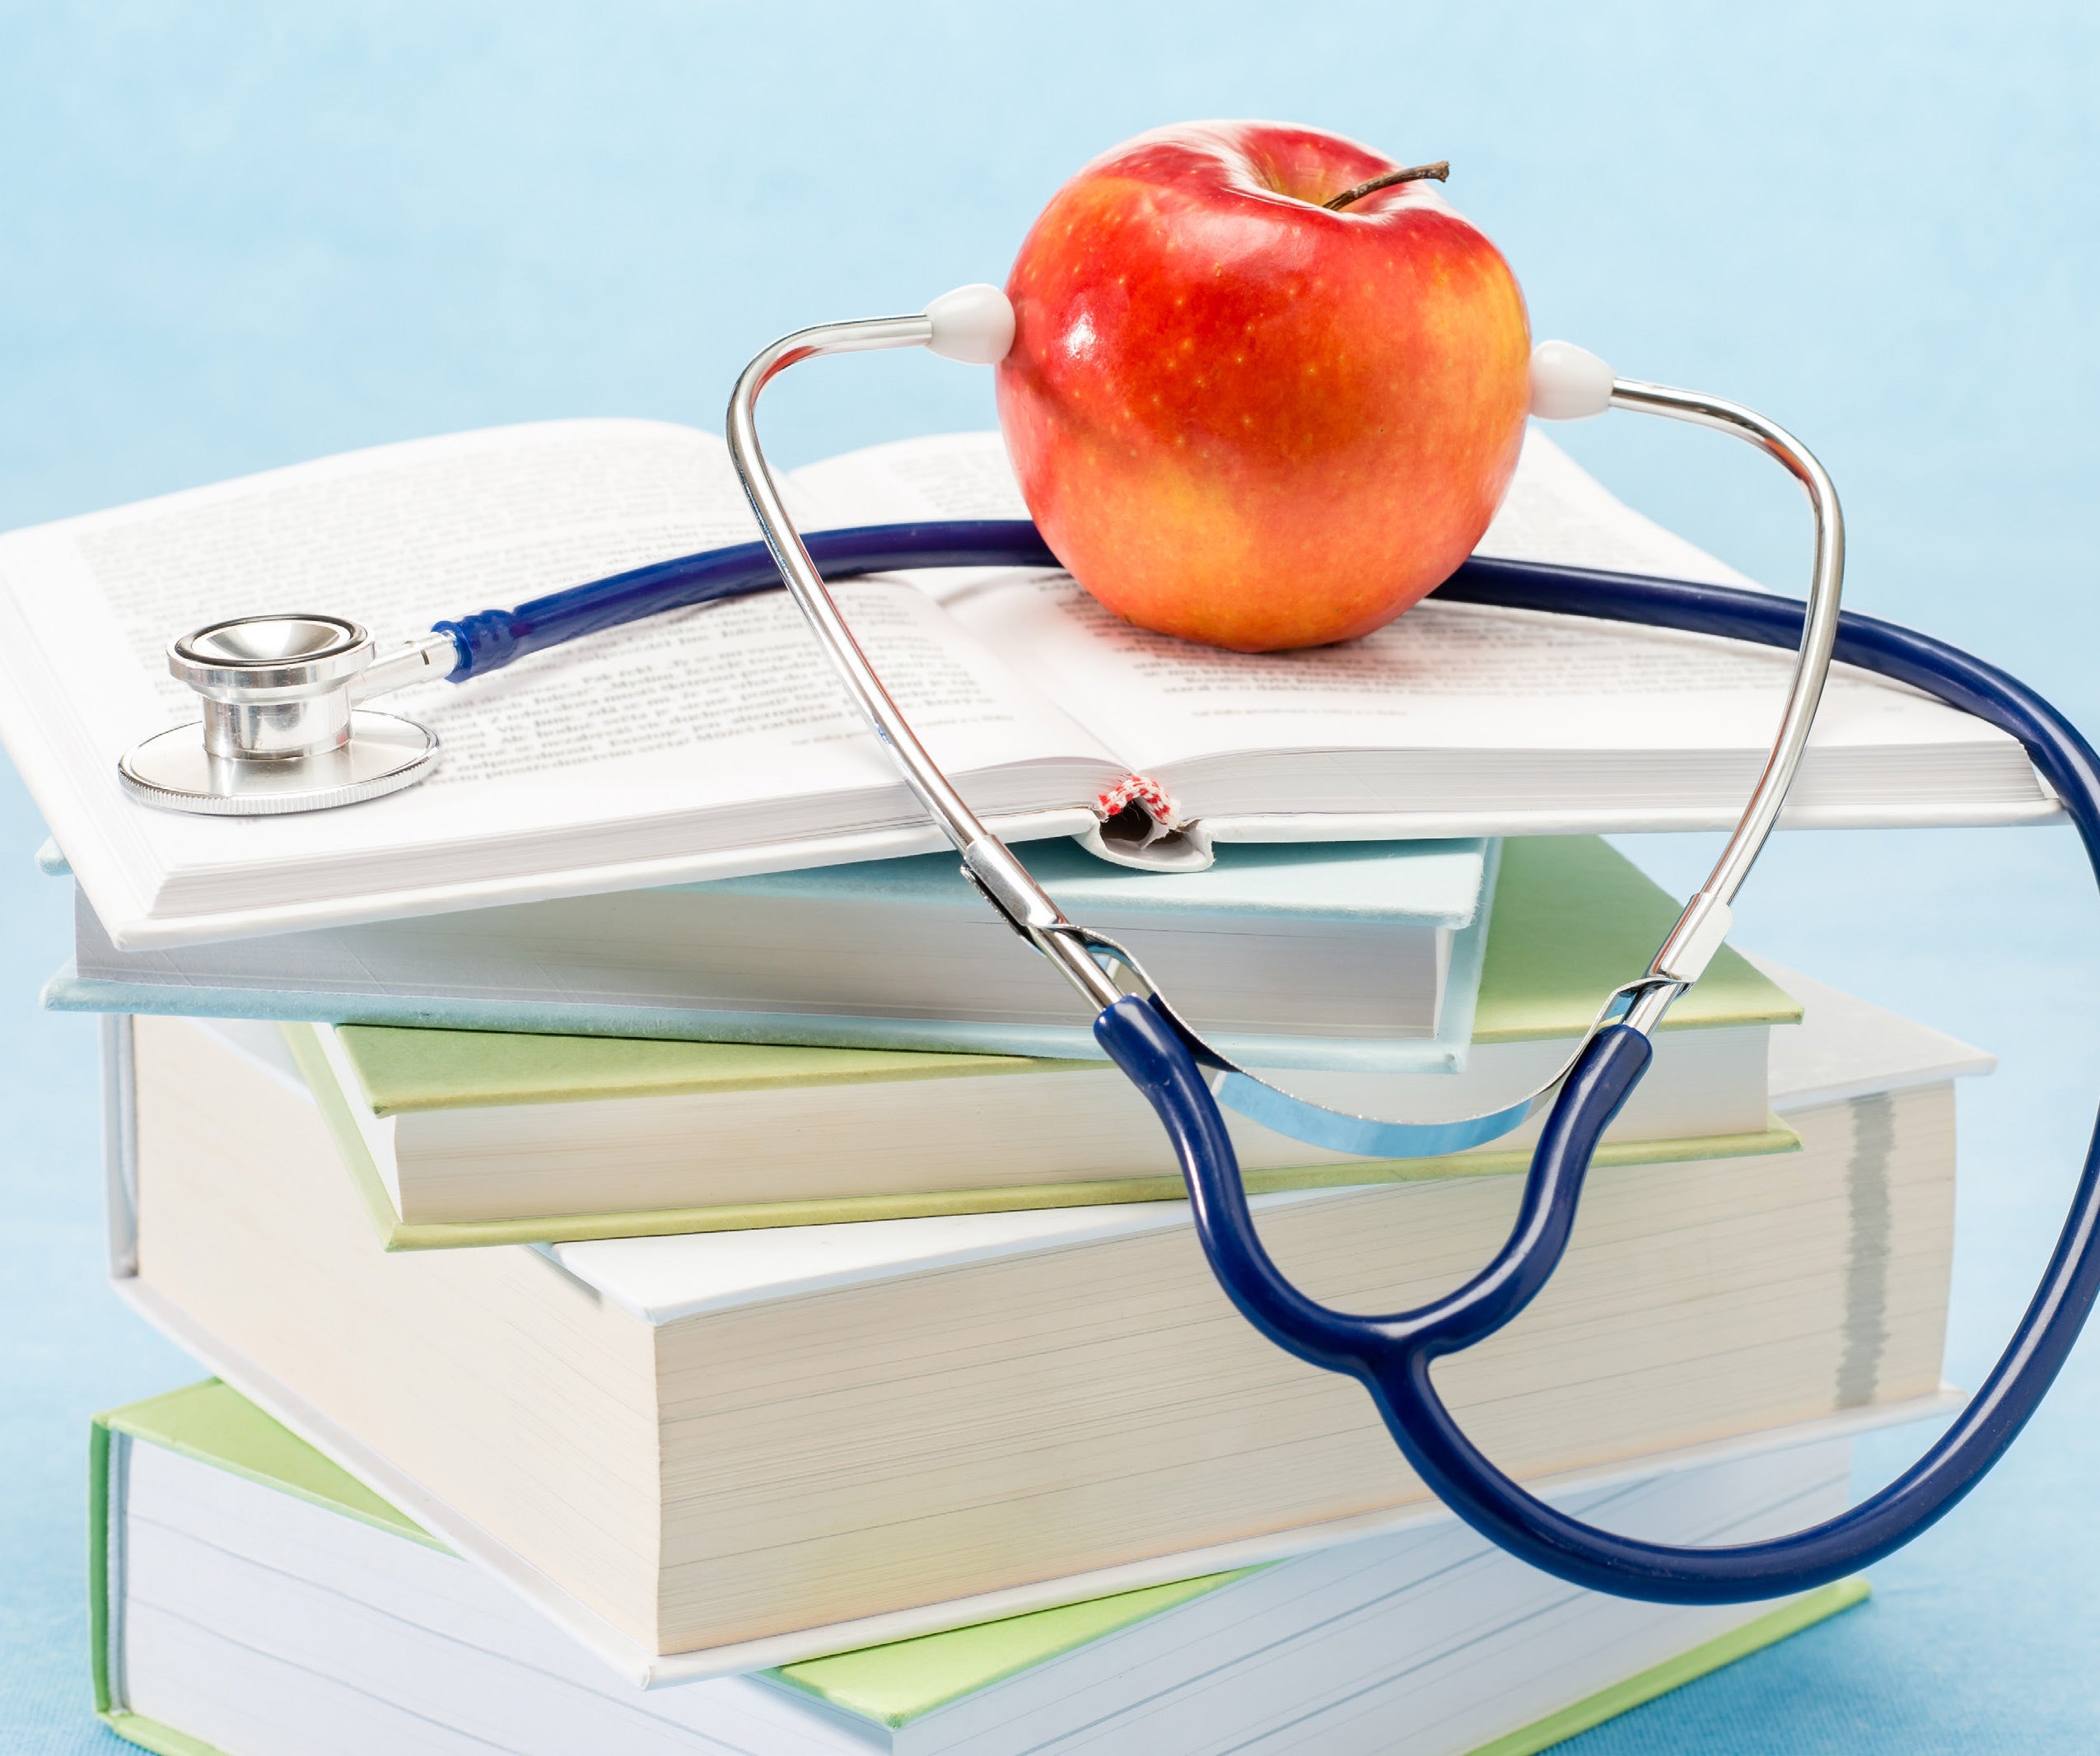 An apple with a stethoscope, on top of a stack of books